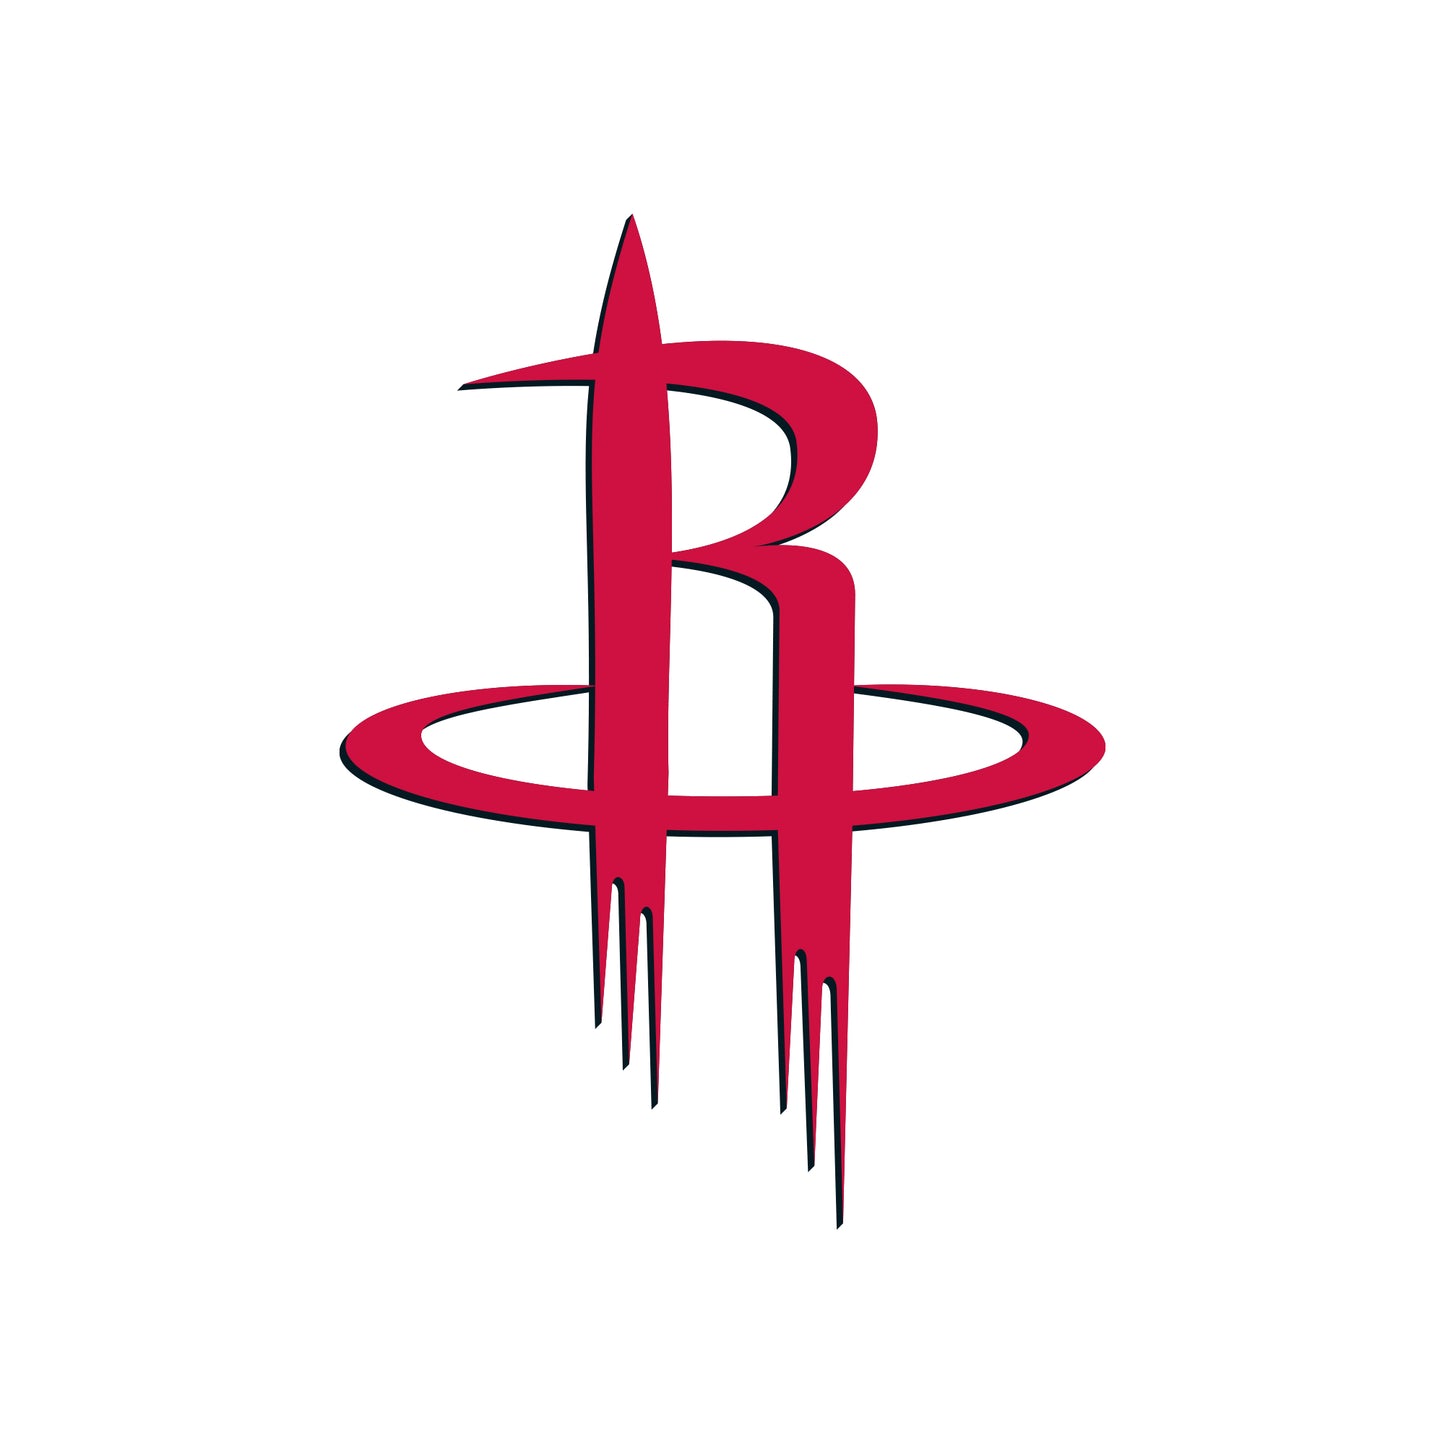 Sheet of 5 -Houston Rockets:   Logos Mini        - Officially Licensed NBA Removable Wall   Adhesive Decal